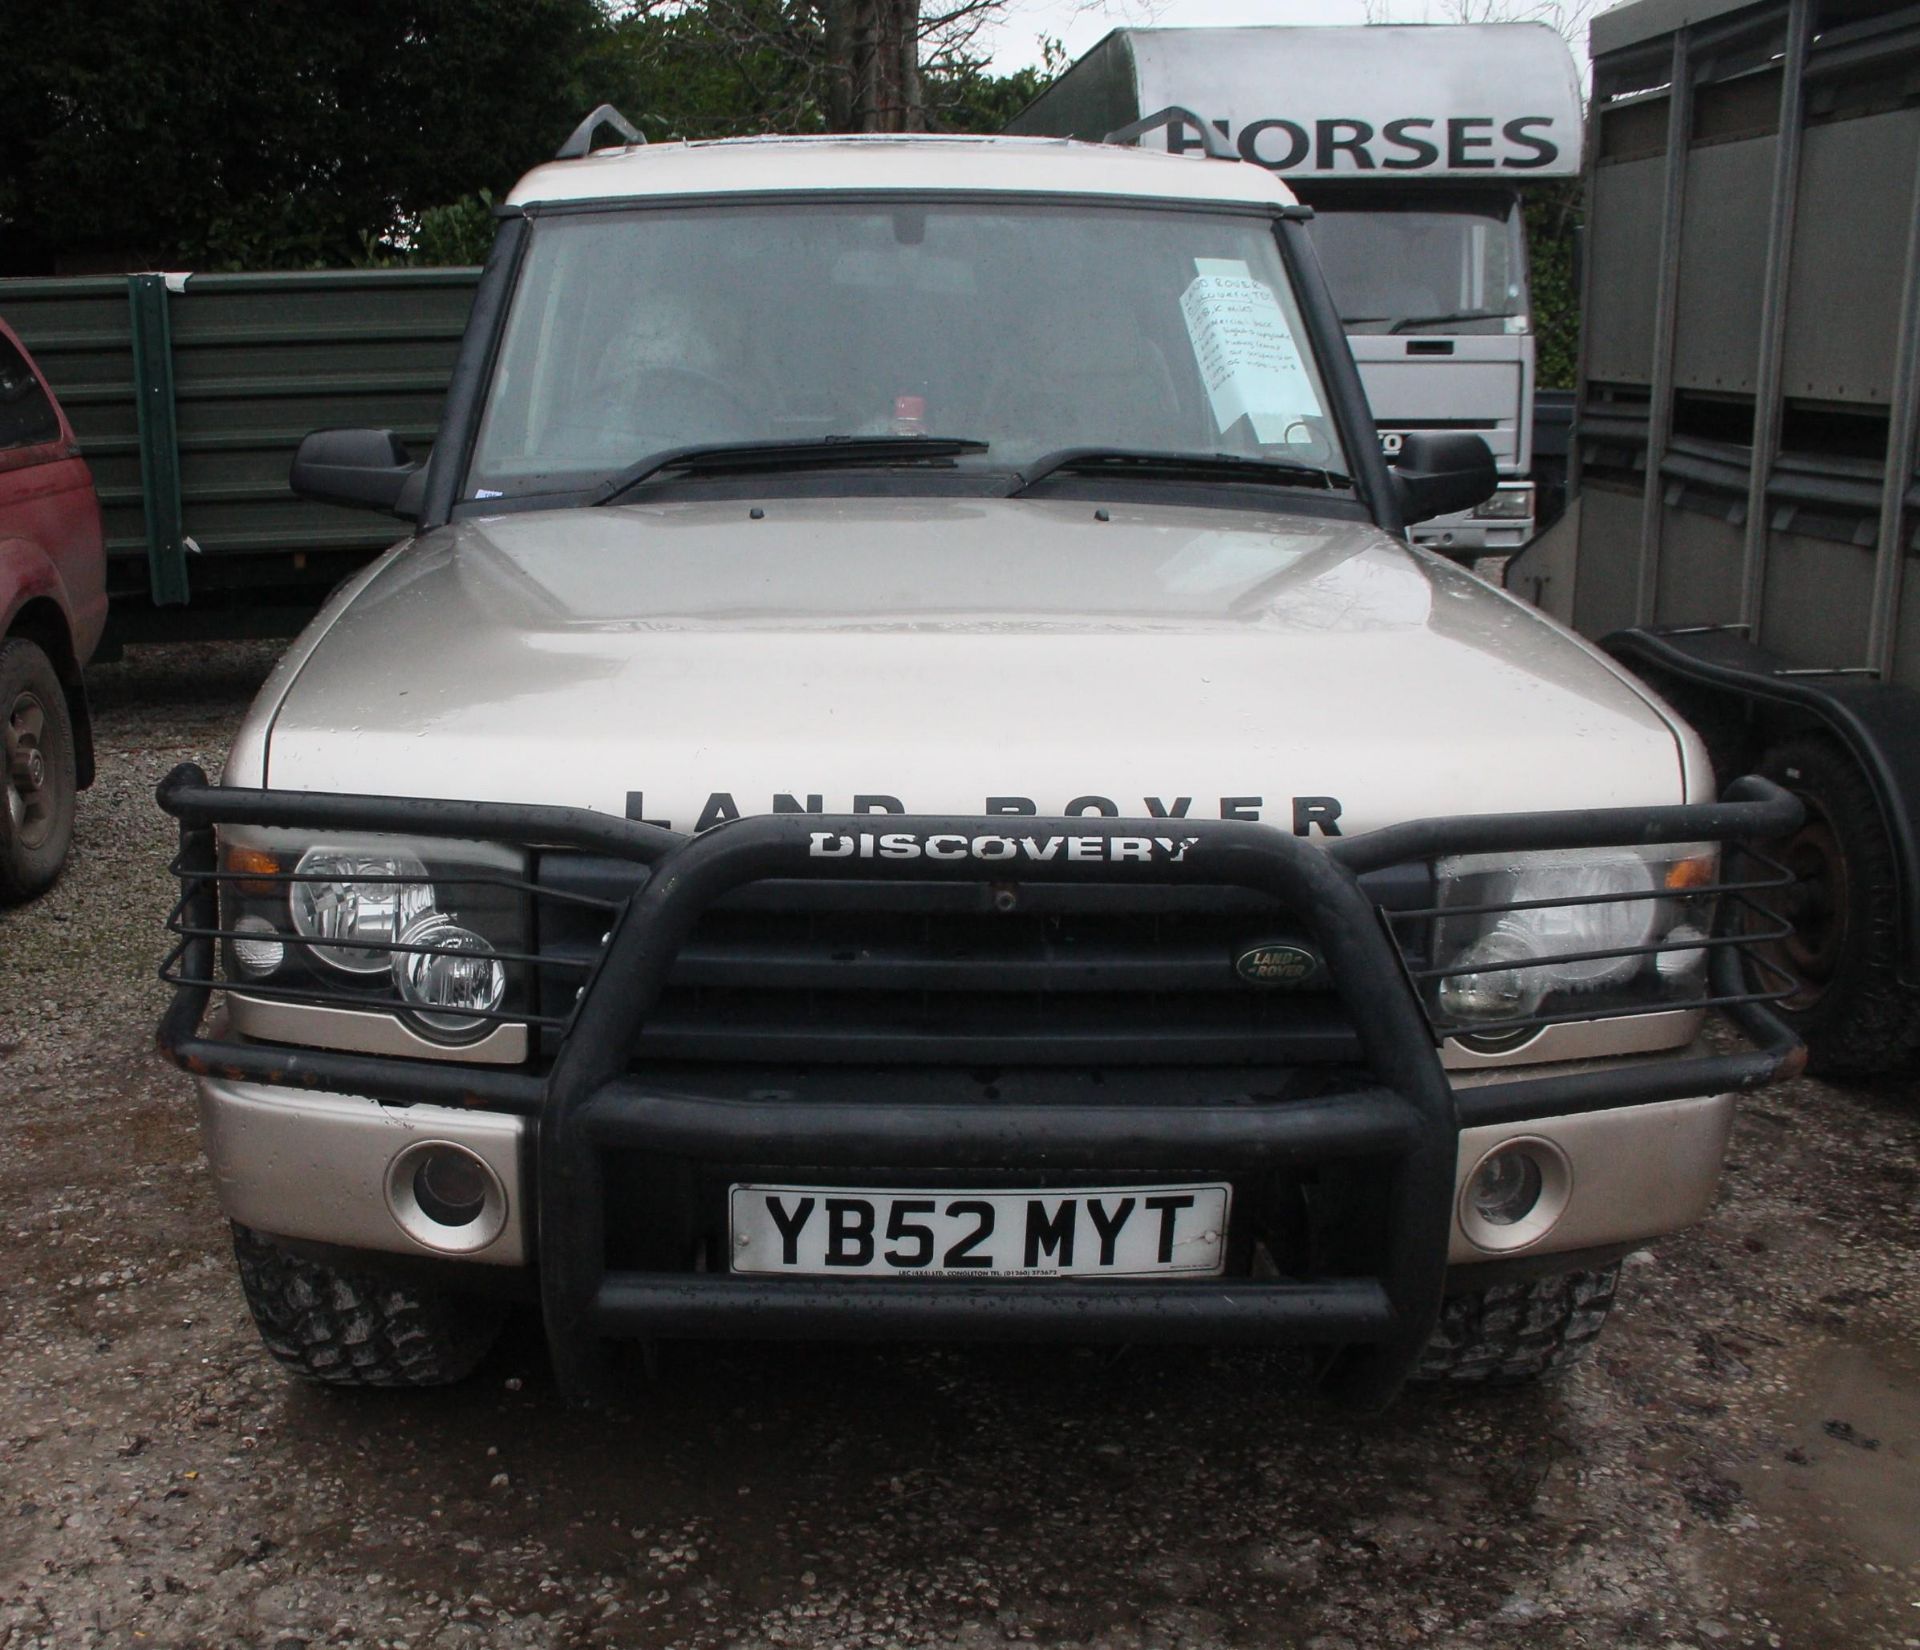 LAND ROVER DISCOVERY 2 YB52MYT MANUAL DIESEL APPROX 158000 MILES FIRST REG 2002 PART SERVICE HISTORY - Image 4 of 4